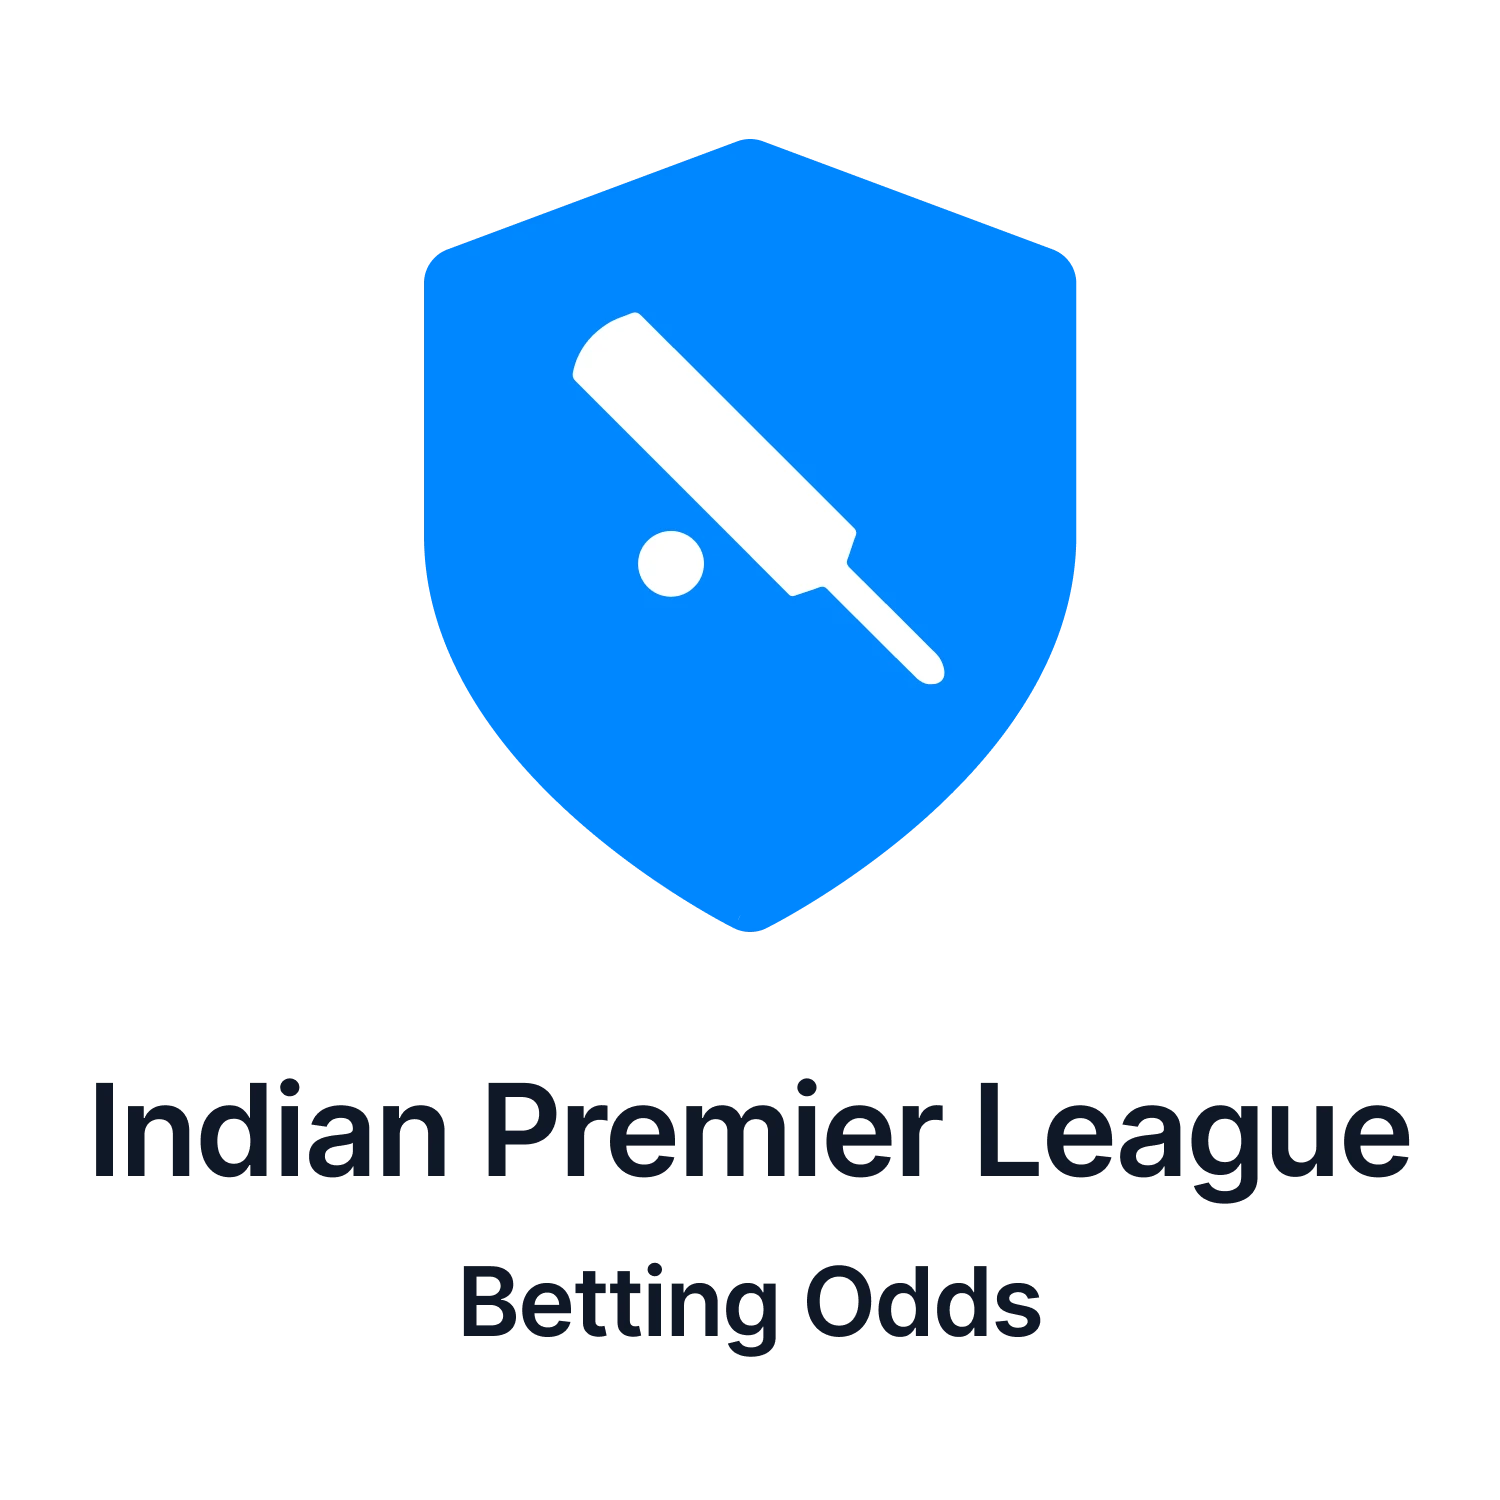 Odds for IPL are here.